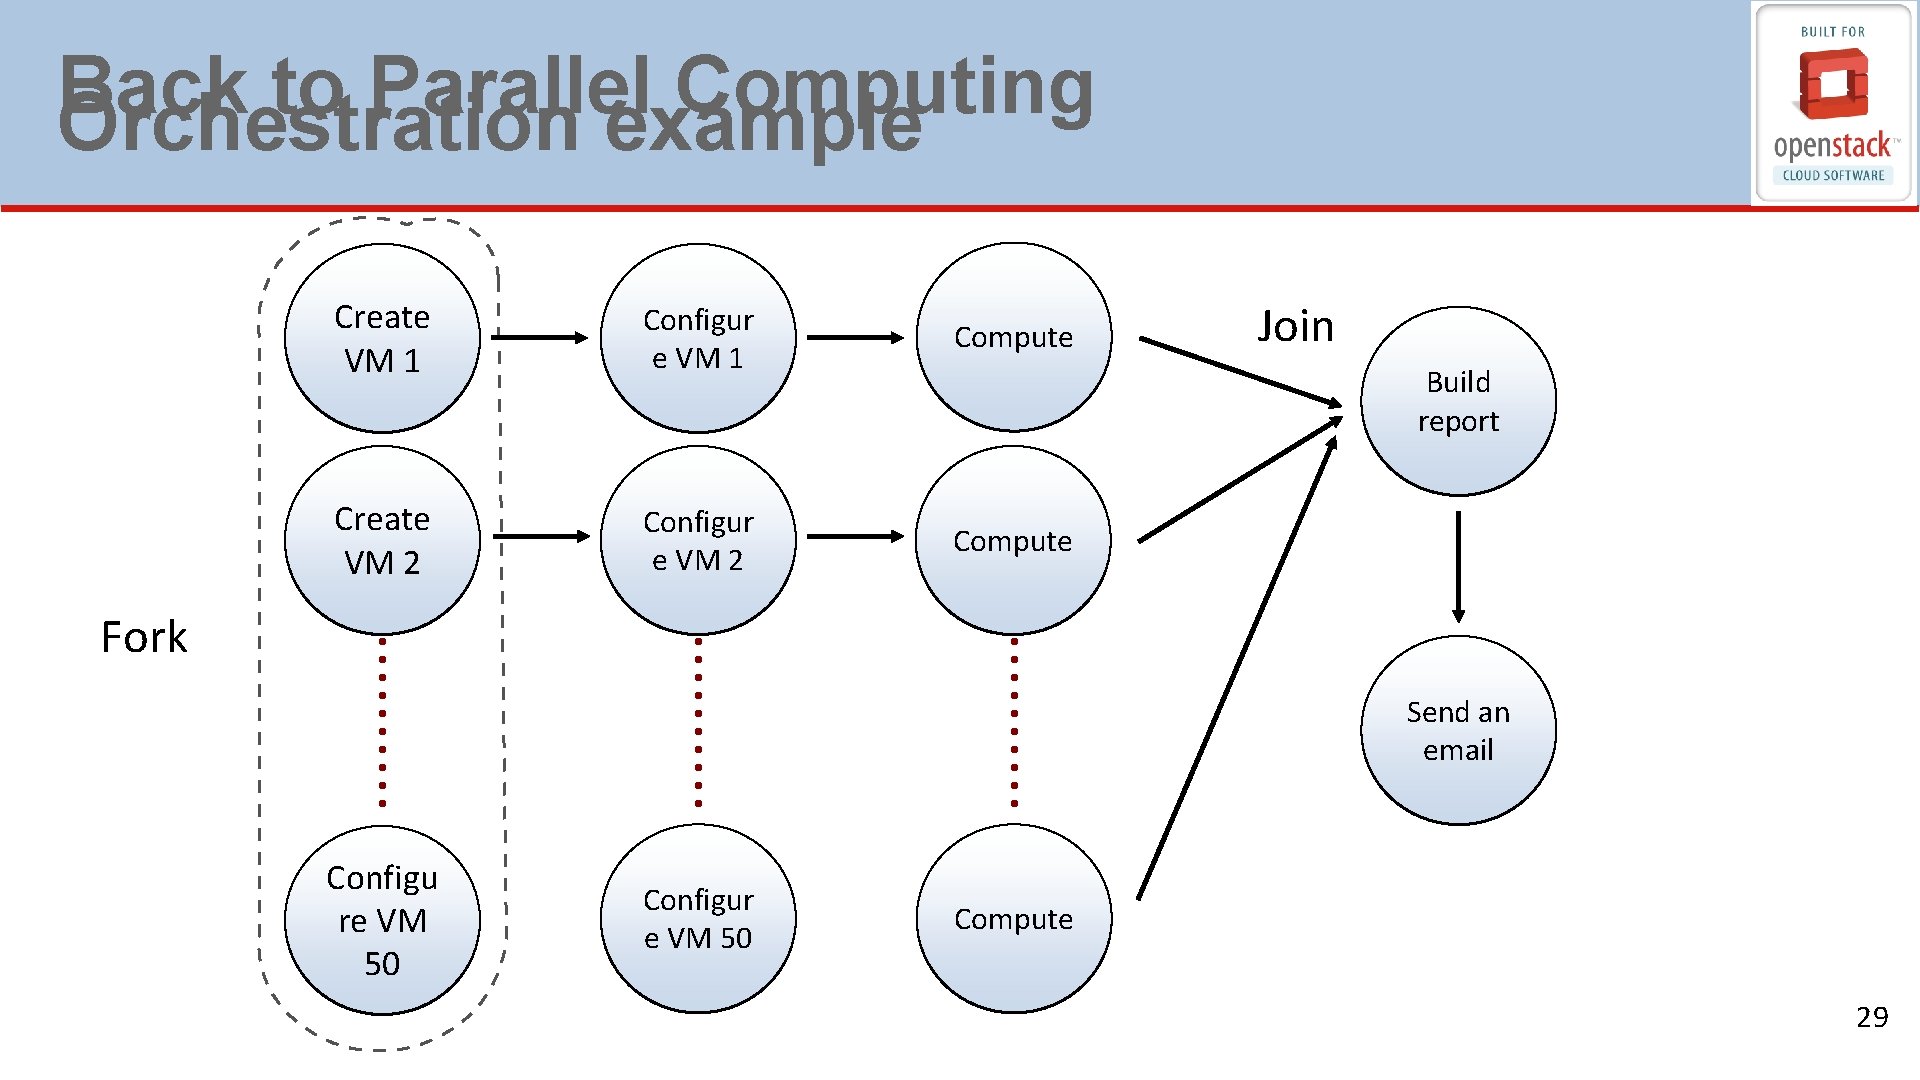 Back to Parallel Computing Orchestration example Create VM 1 Configur e VM 1 Compute